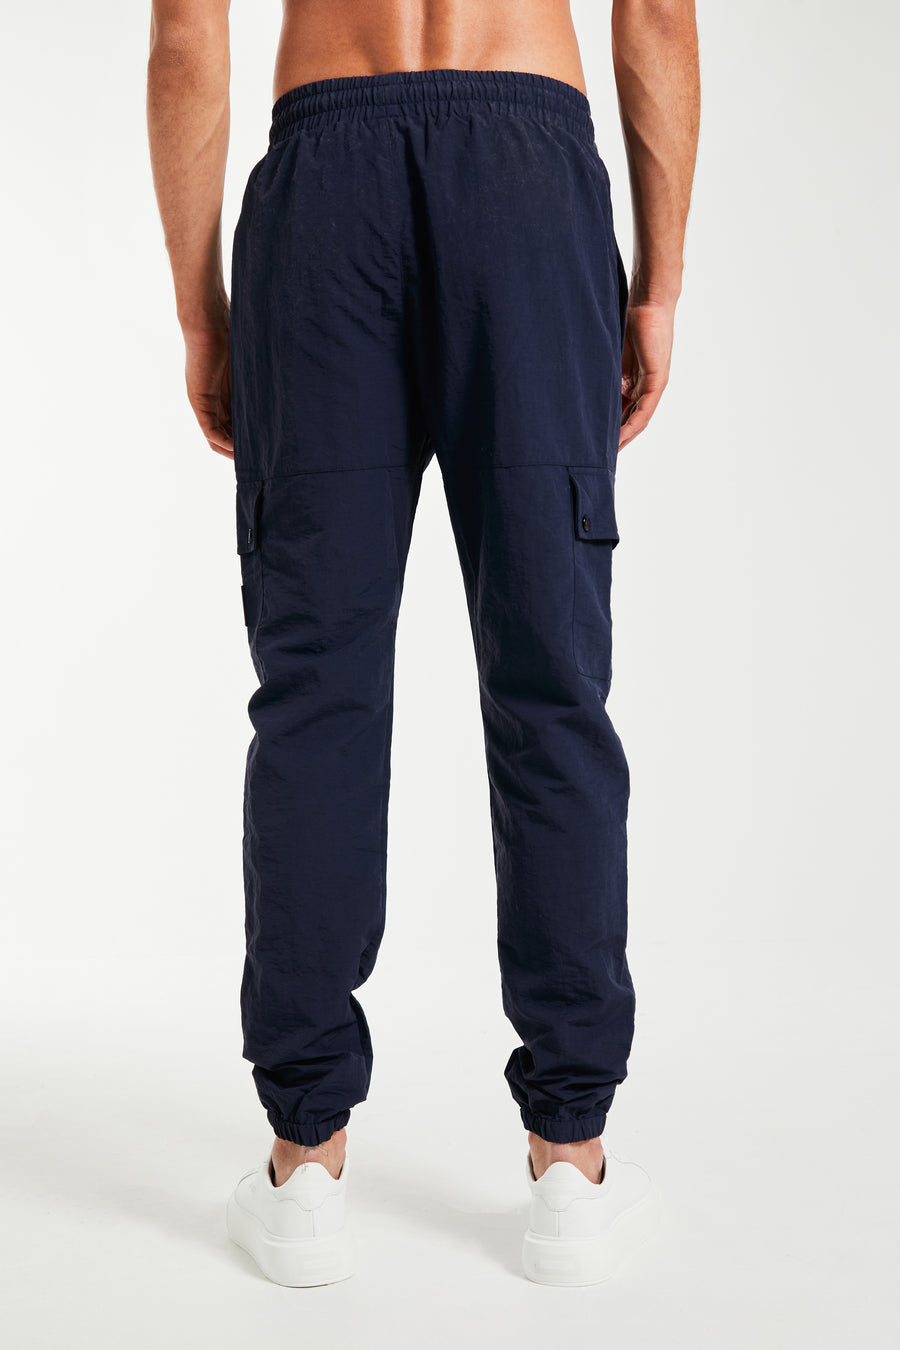 back profile of cheap cargo pants for men in royal blue